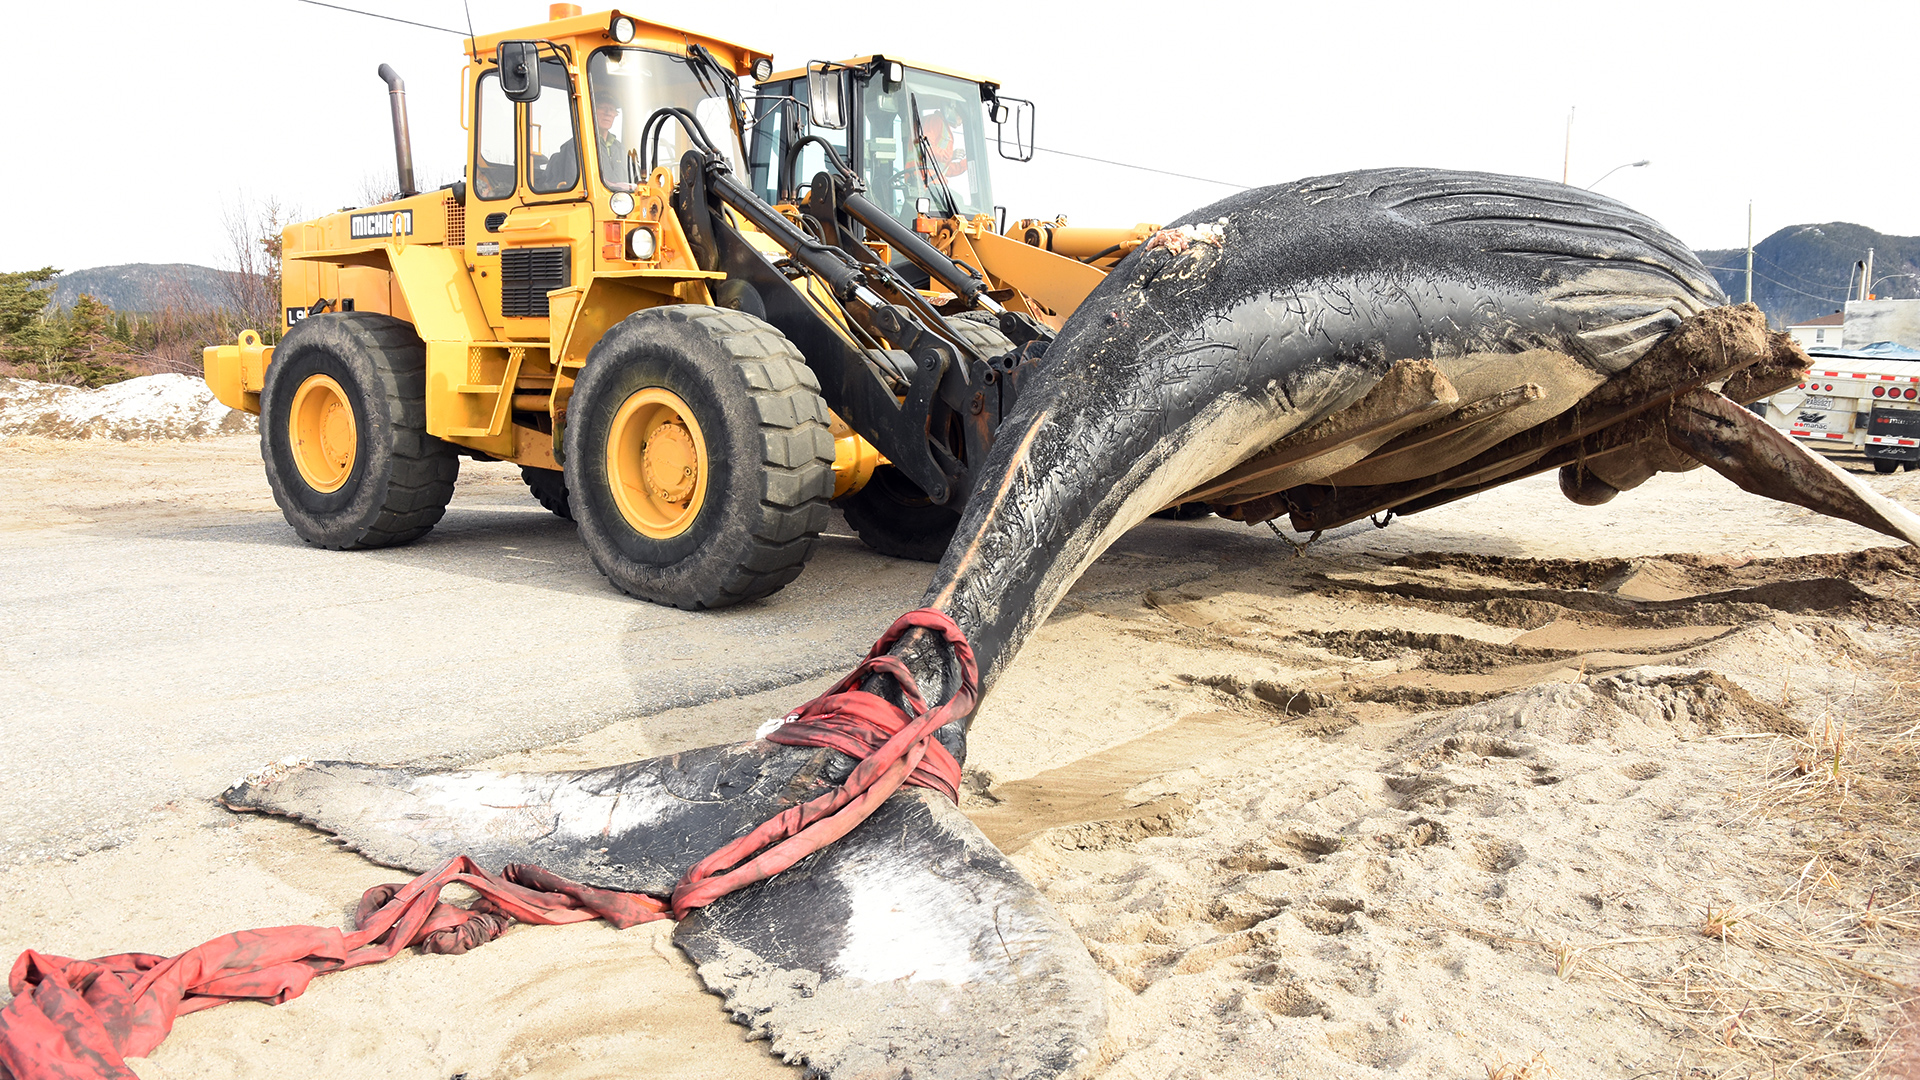 A humpback whale carcass is lifted by a front-end loader.